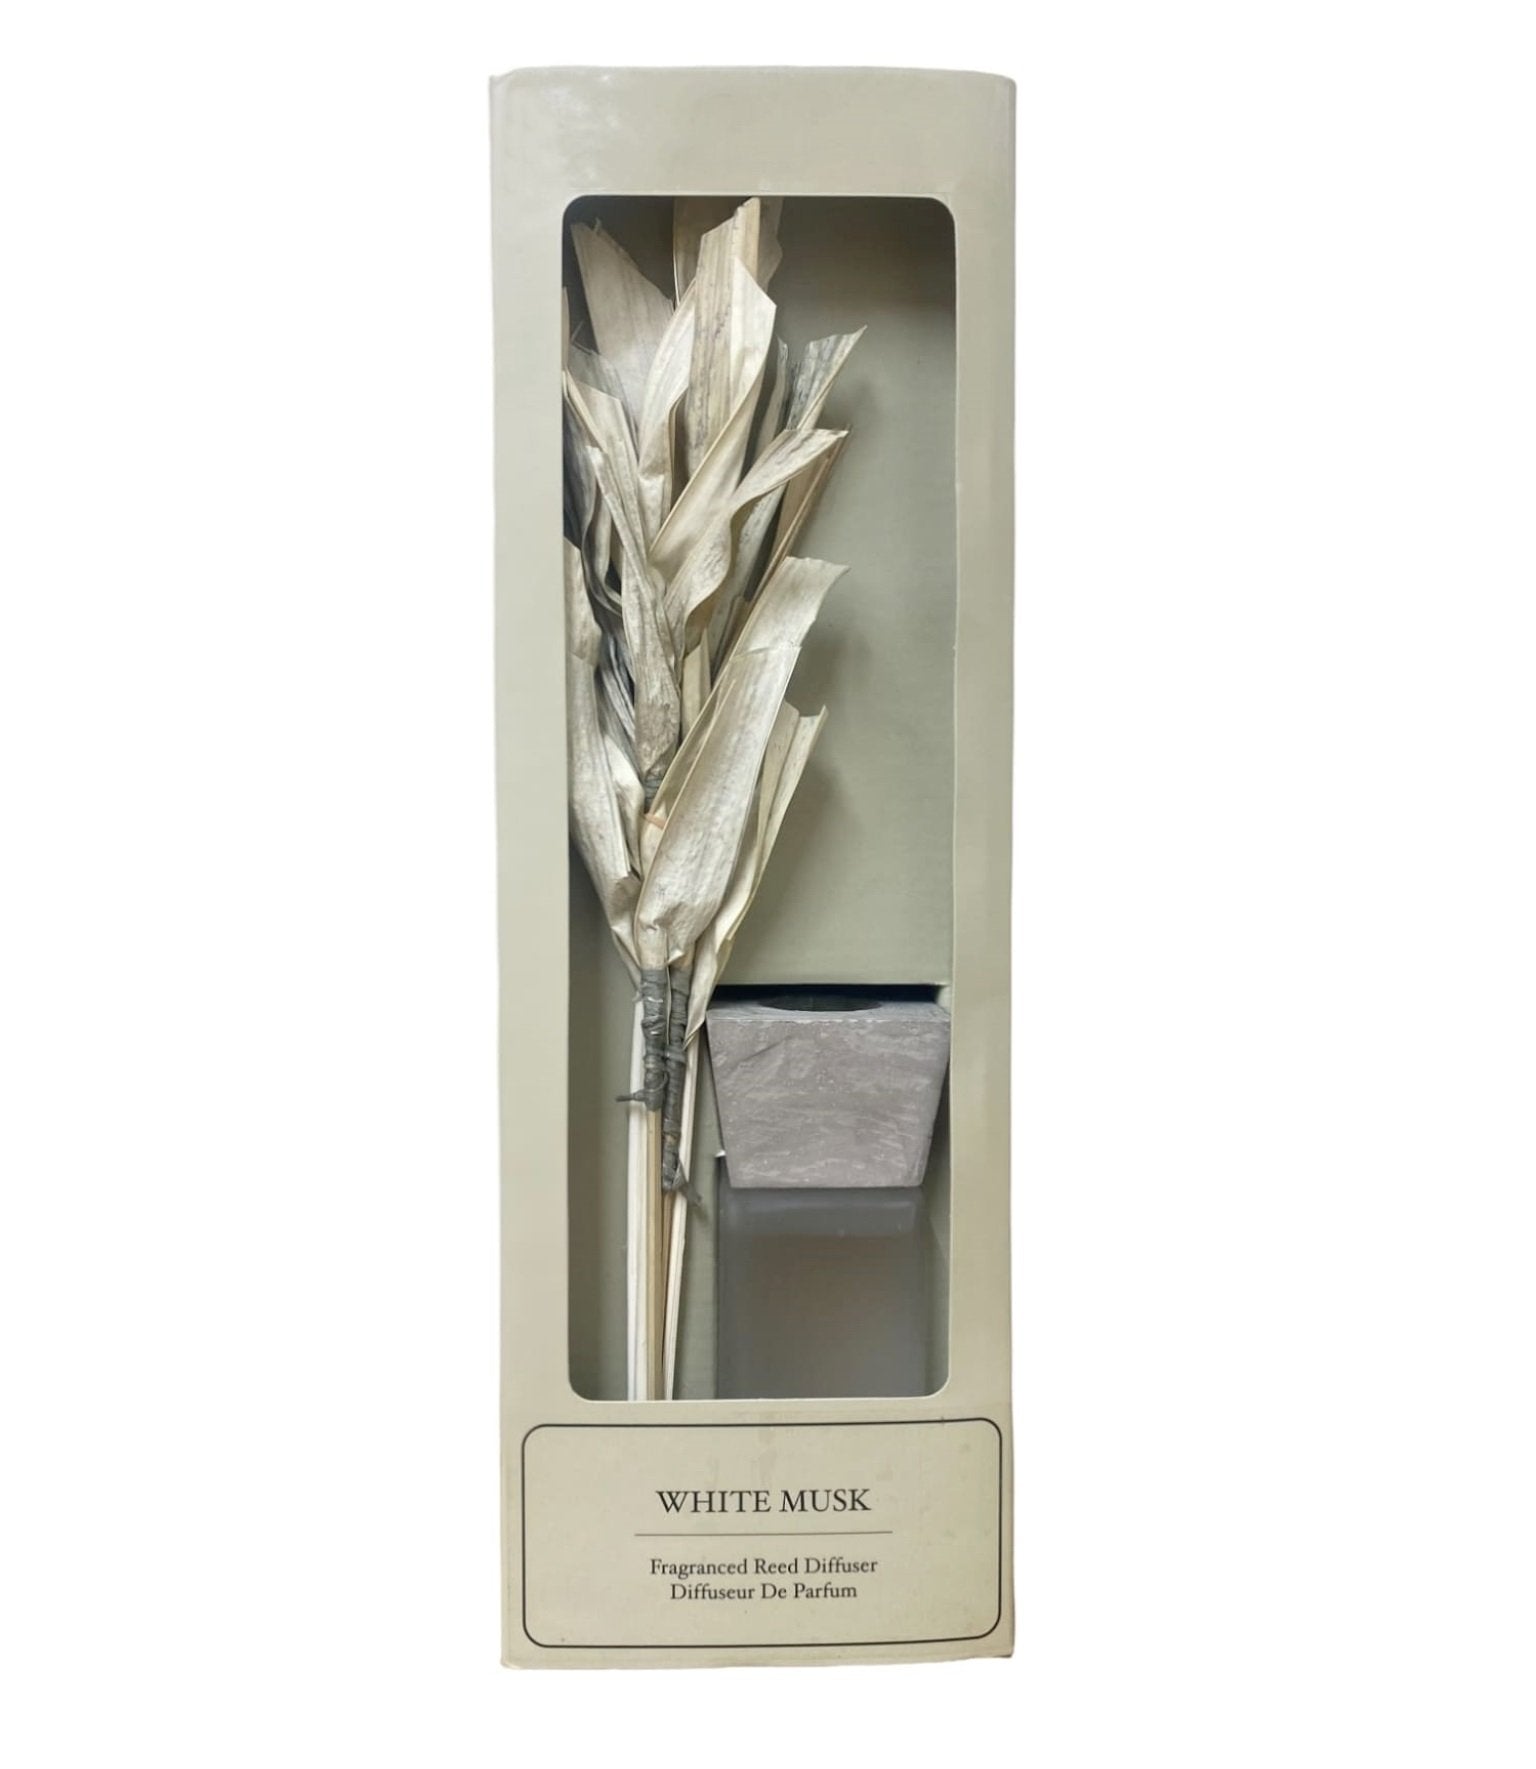 View White Musk Luxury 100ml Reed Diffuser information